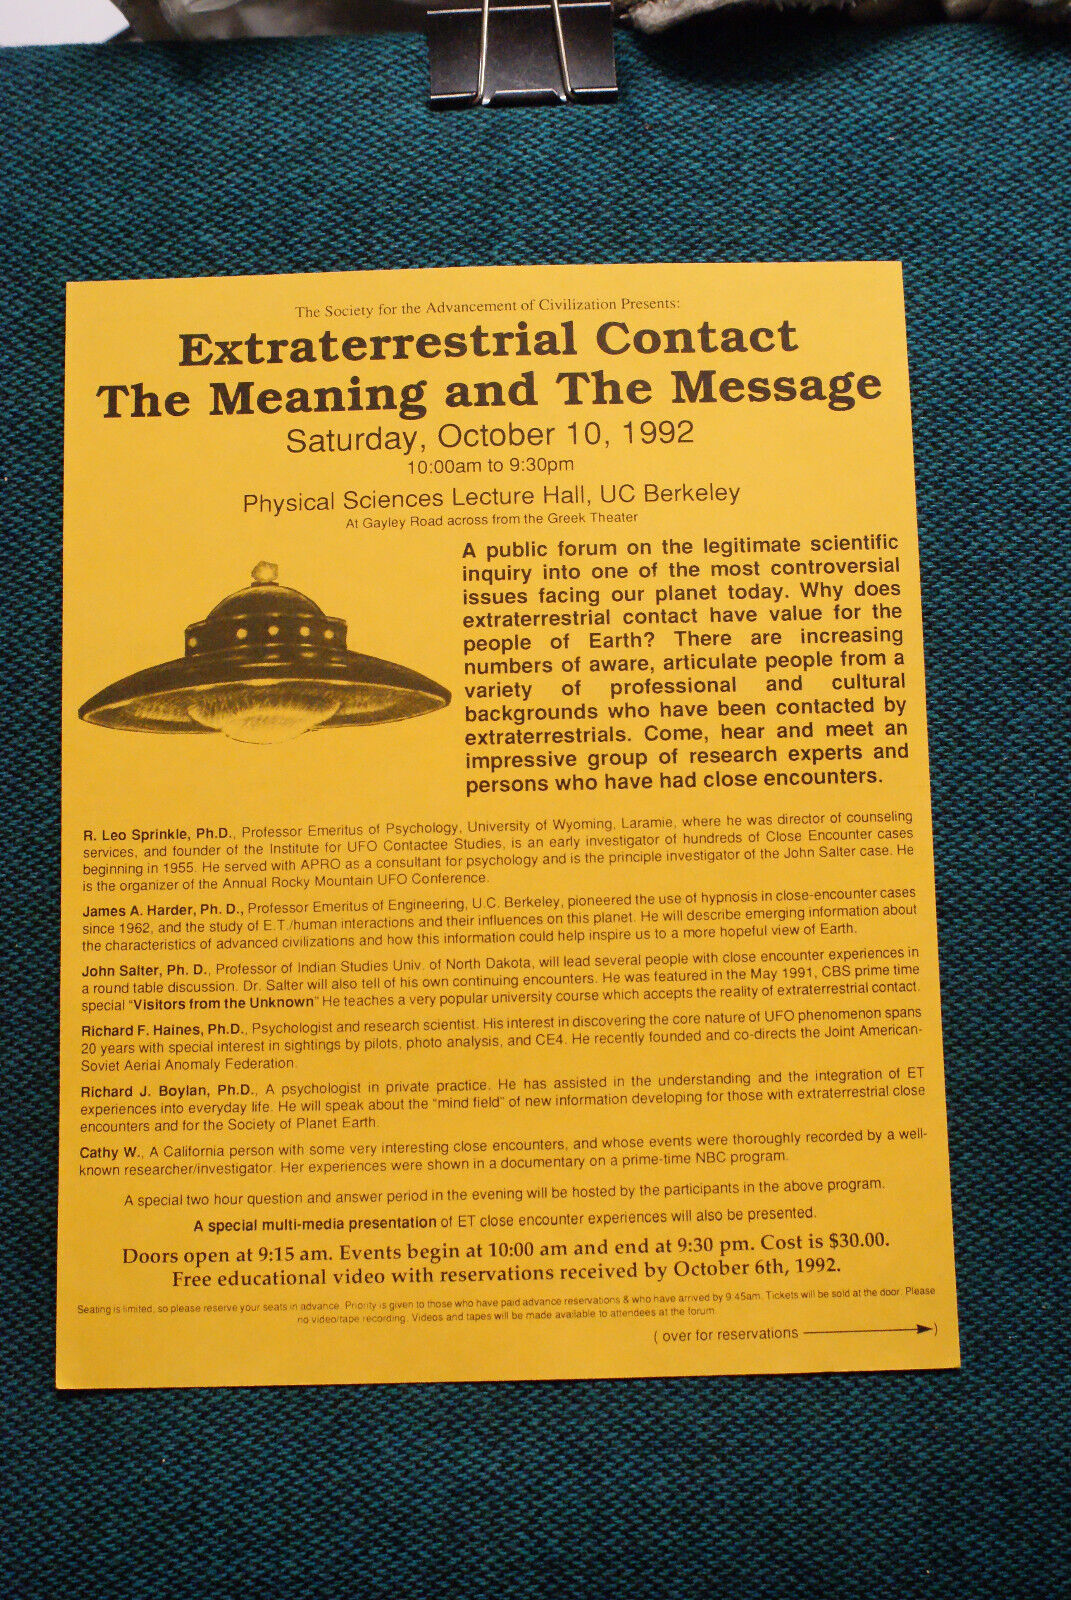 UFO - Extraterrestrial Contact - Meaning & Message - Oct 10, 1992 - Flyer